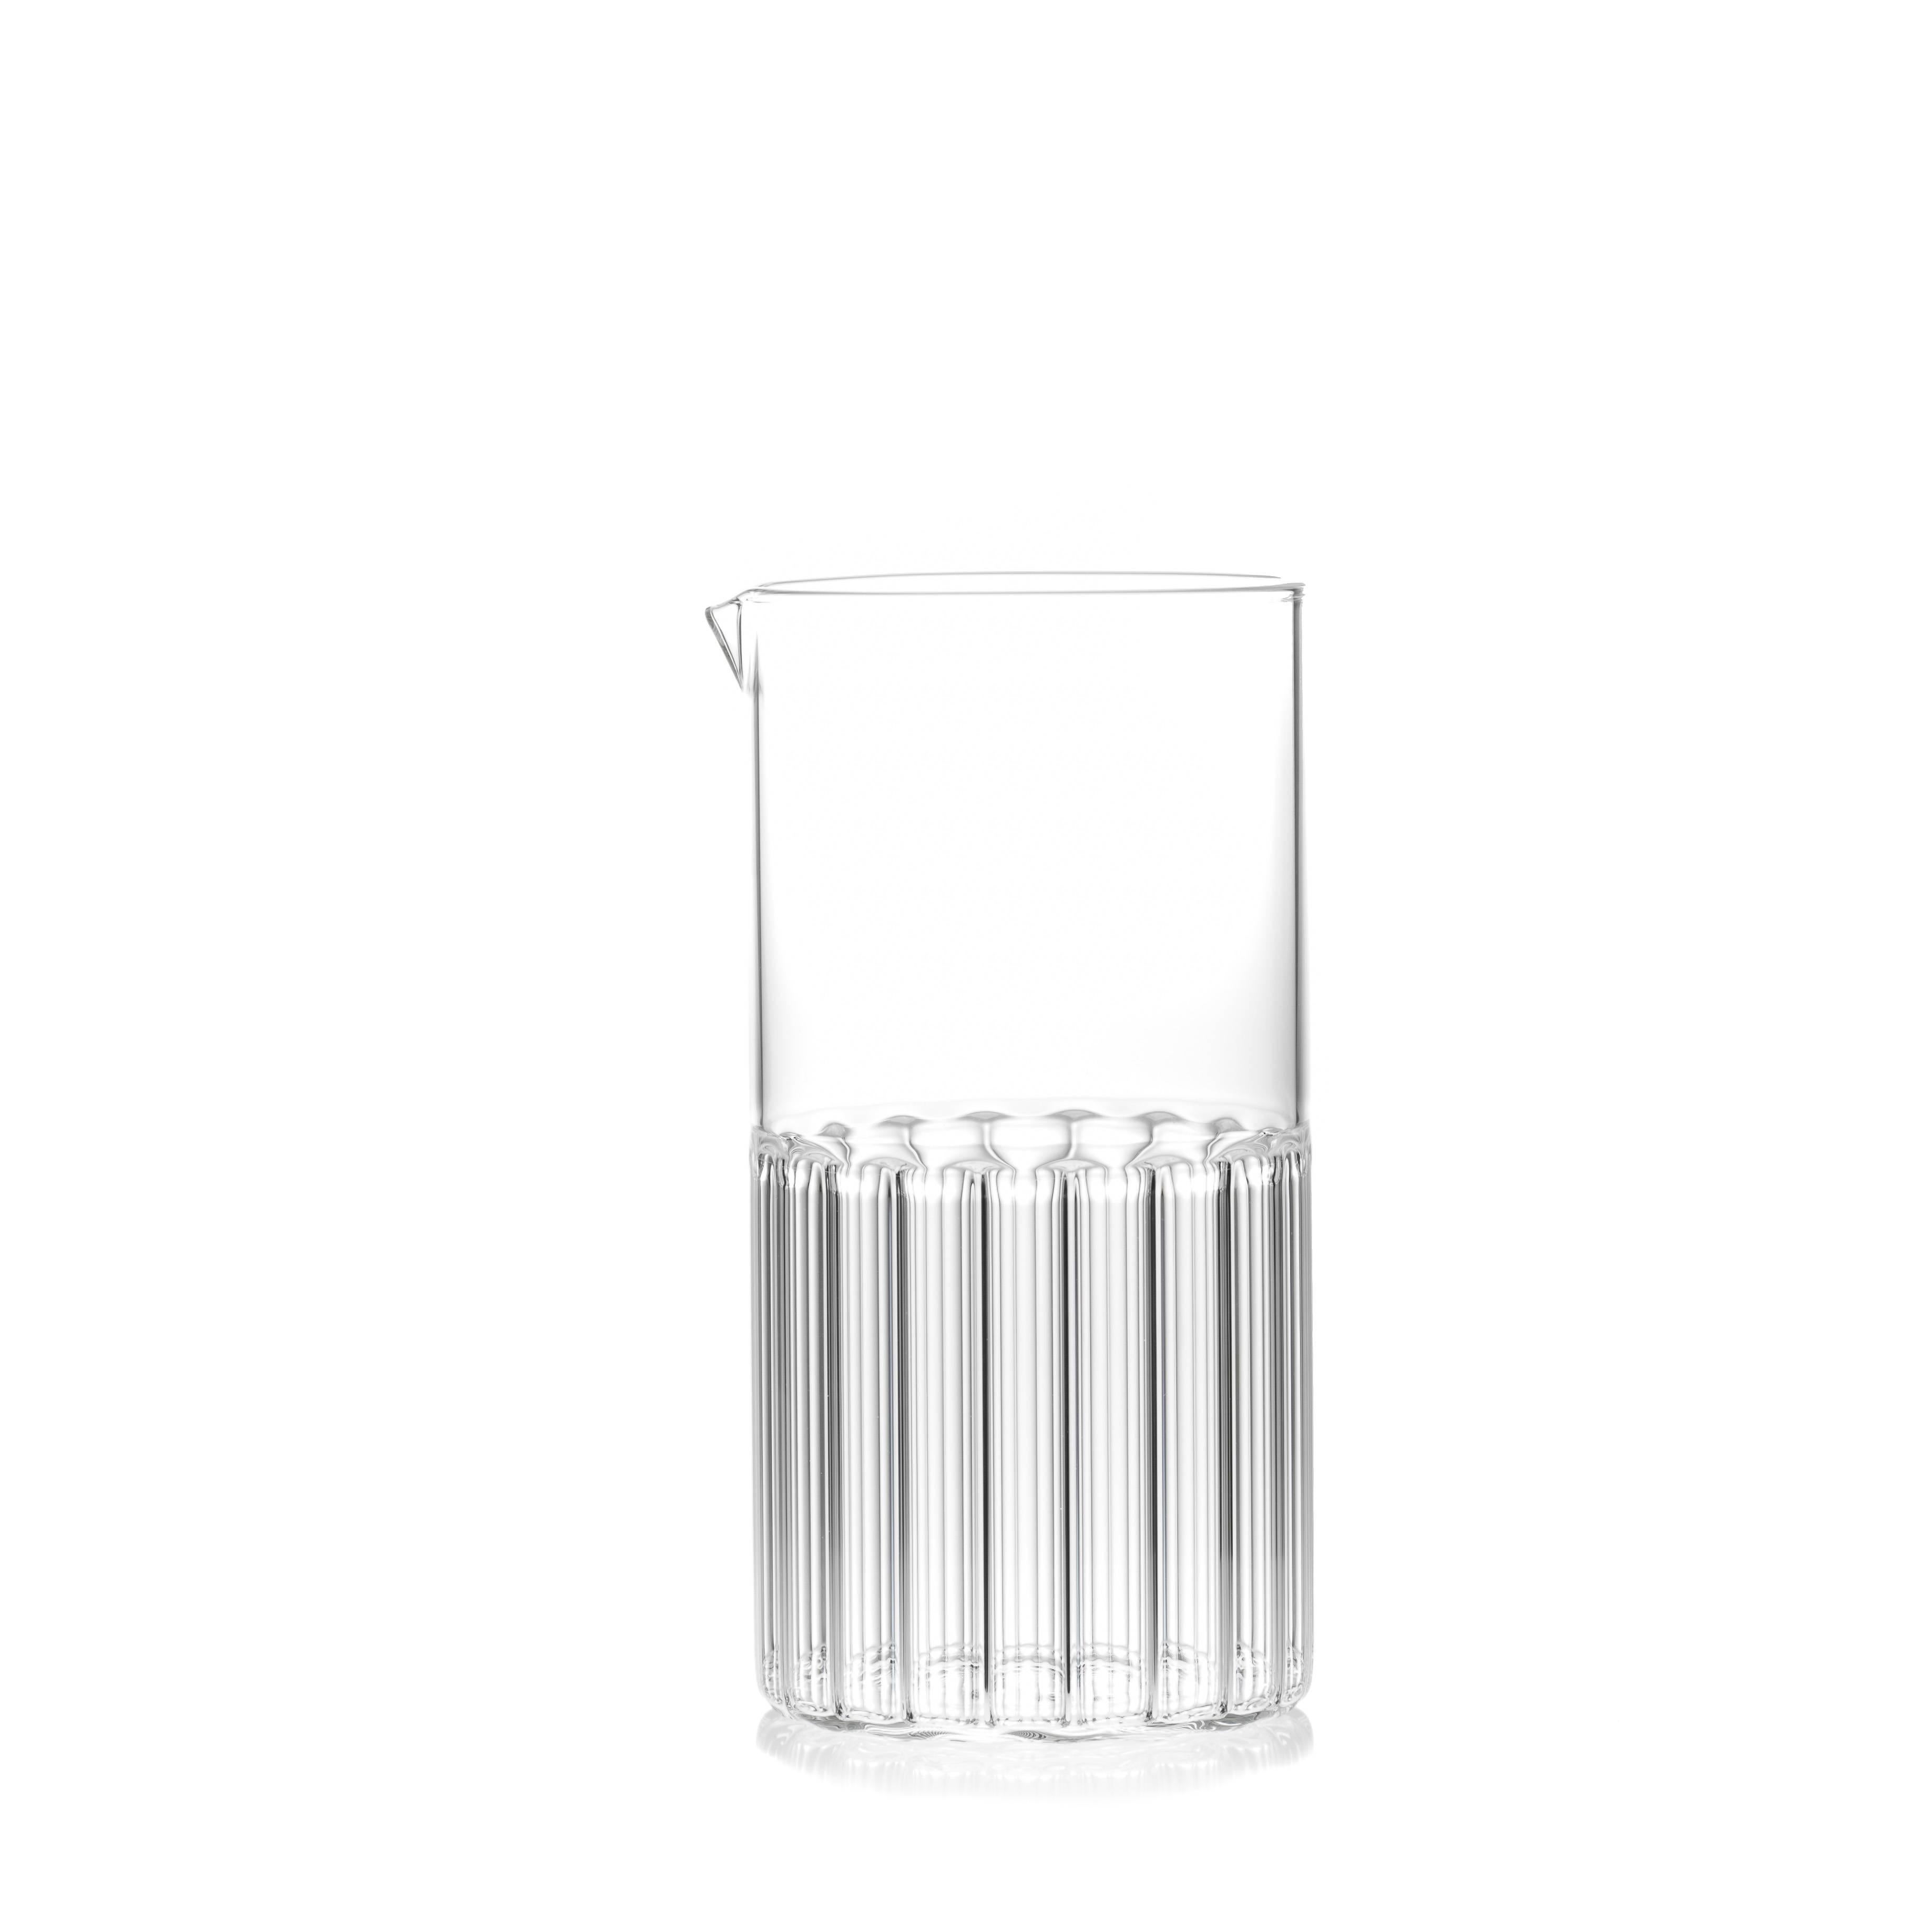 This contemporary clear glassware set includes 1 Bessho Carafe and 6 Rila Large Glasses. Each pieces is handmade in the Czech Republic.

Just as the small town is known for the healing properties of its hot springs, so are the evenings we spend with